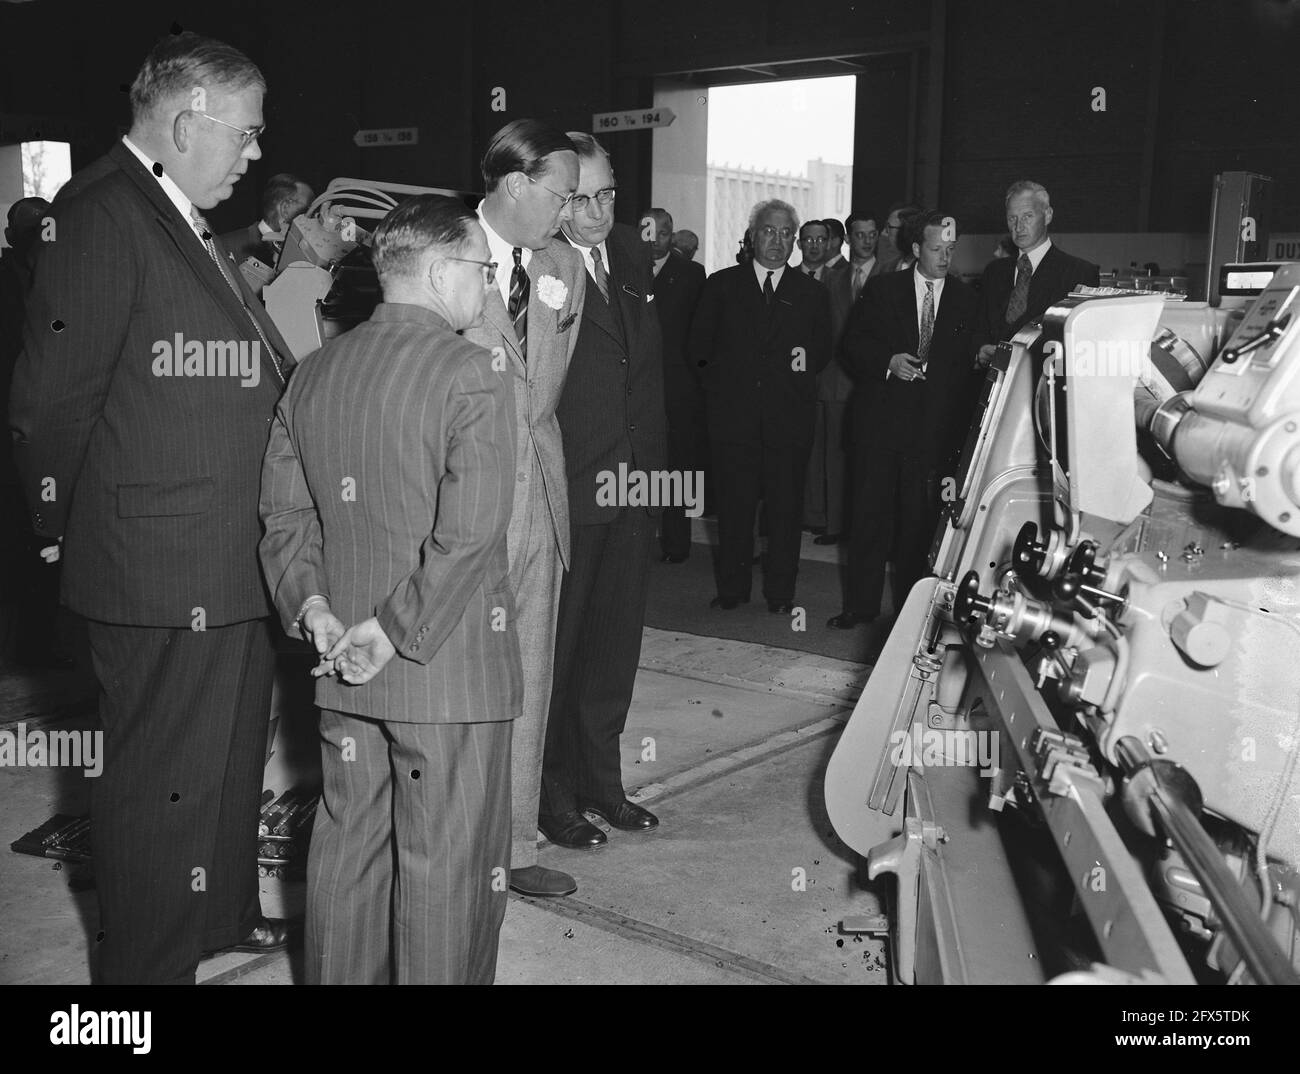 Prince Bernhard at the Technic Show in Utrecht, June 7, 1955, exhibitions, The Netherlands, 20th century press agency photo, news to remember, documentary, historic photography 1945-1990, visual stories, human history of the Twentieth Century, capturing moments in time Stock Photo